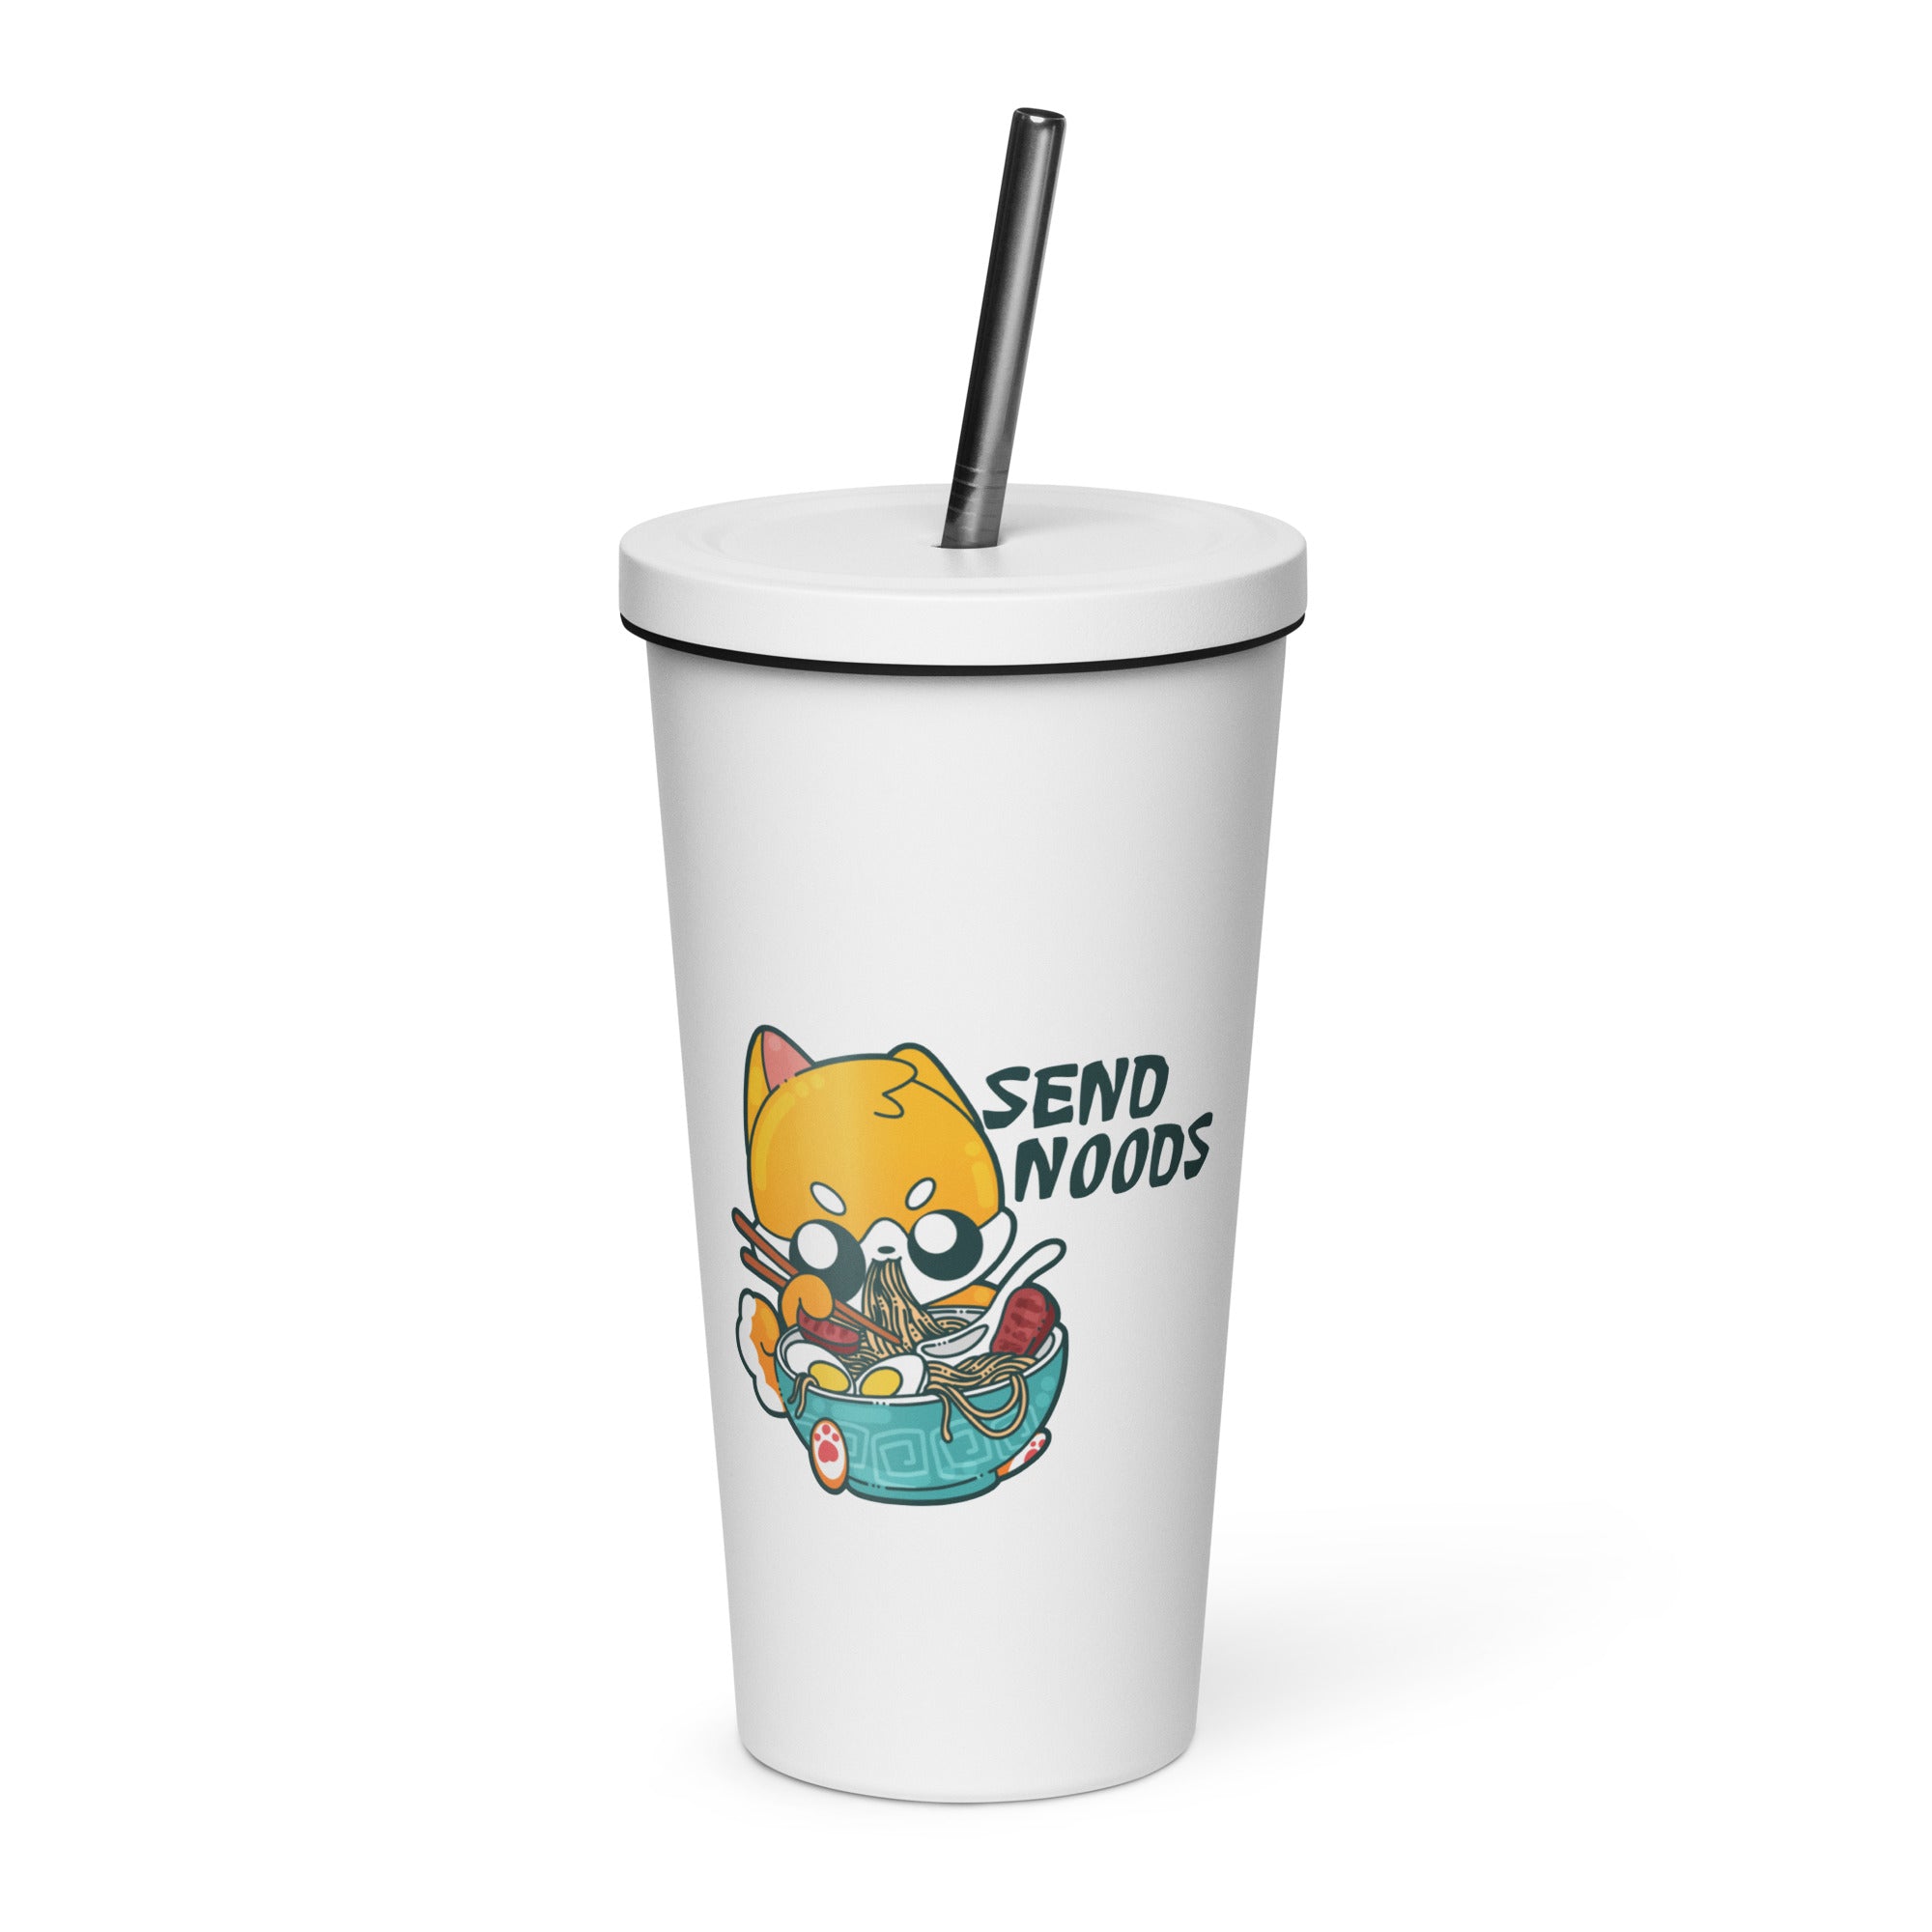 SEND NOODS - Insulated Tumbler